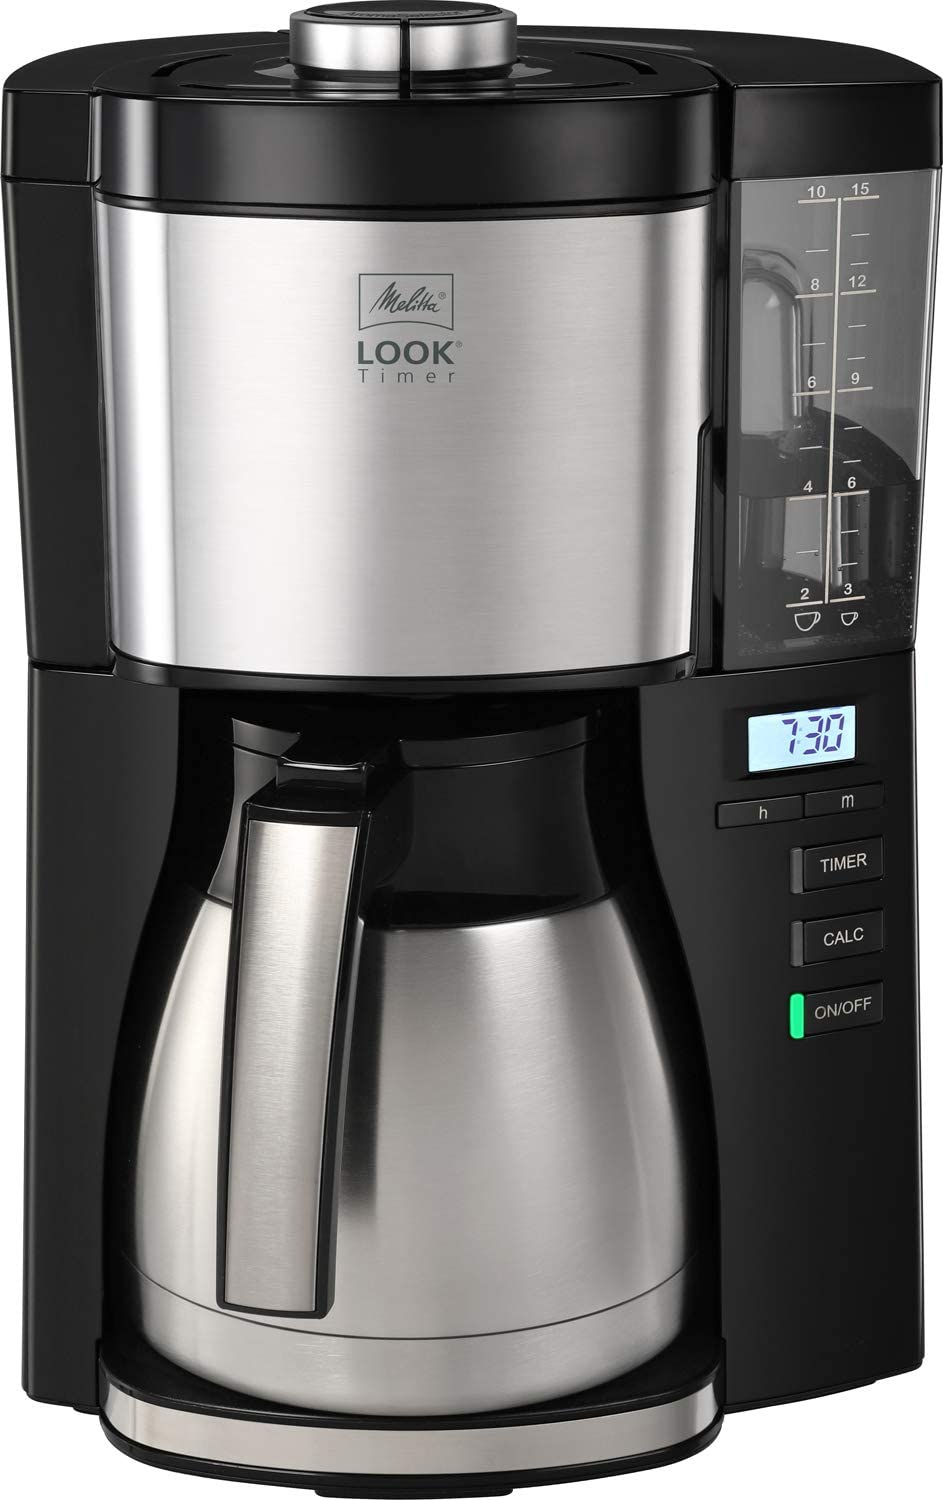 Melitta Look Therm Timer Cafetière